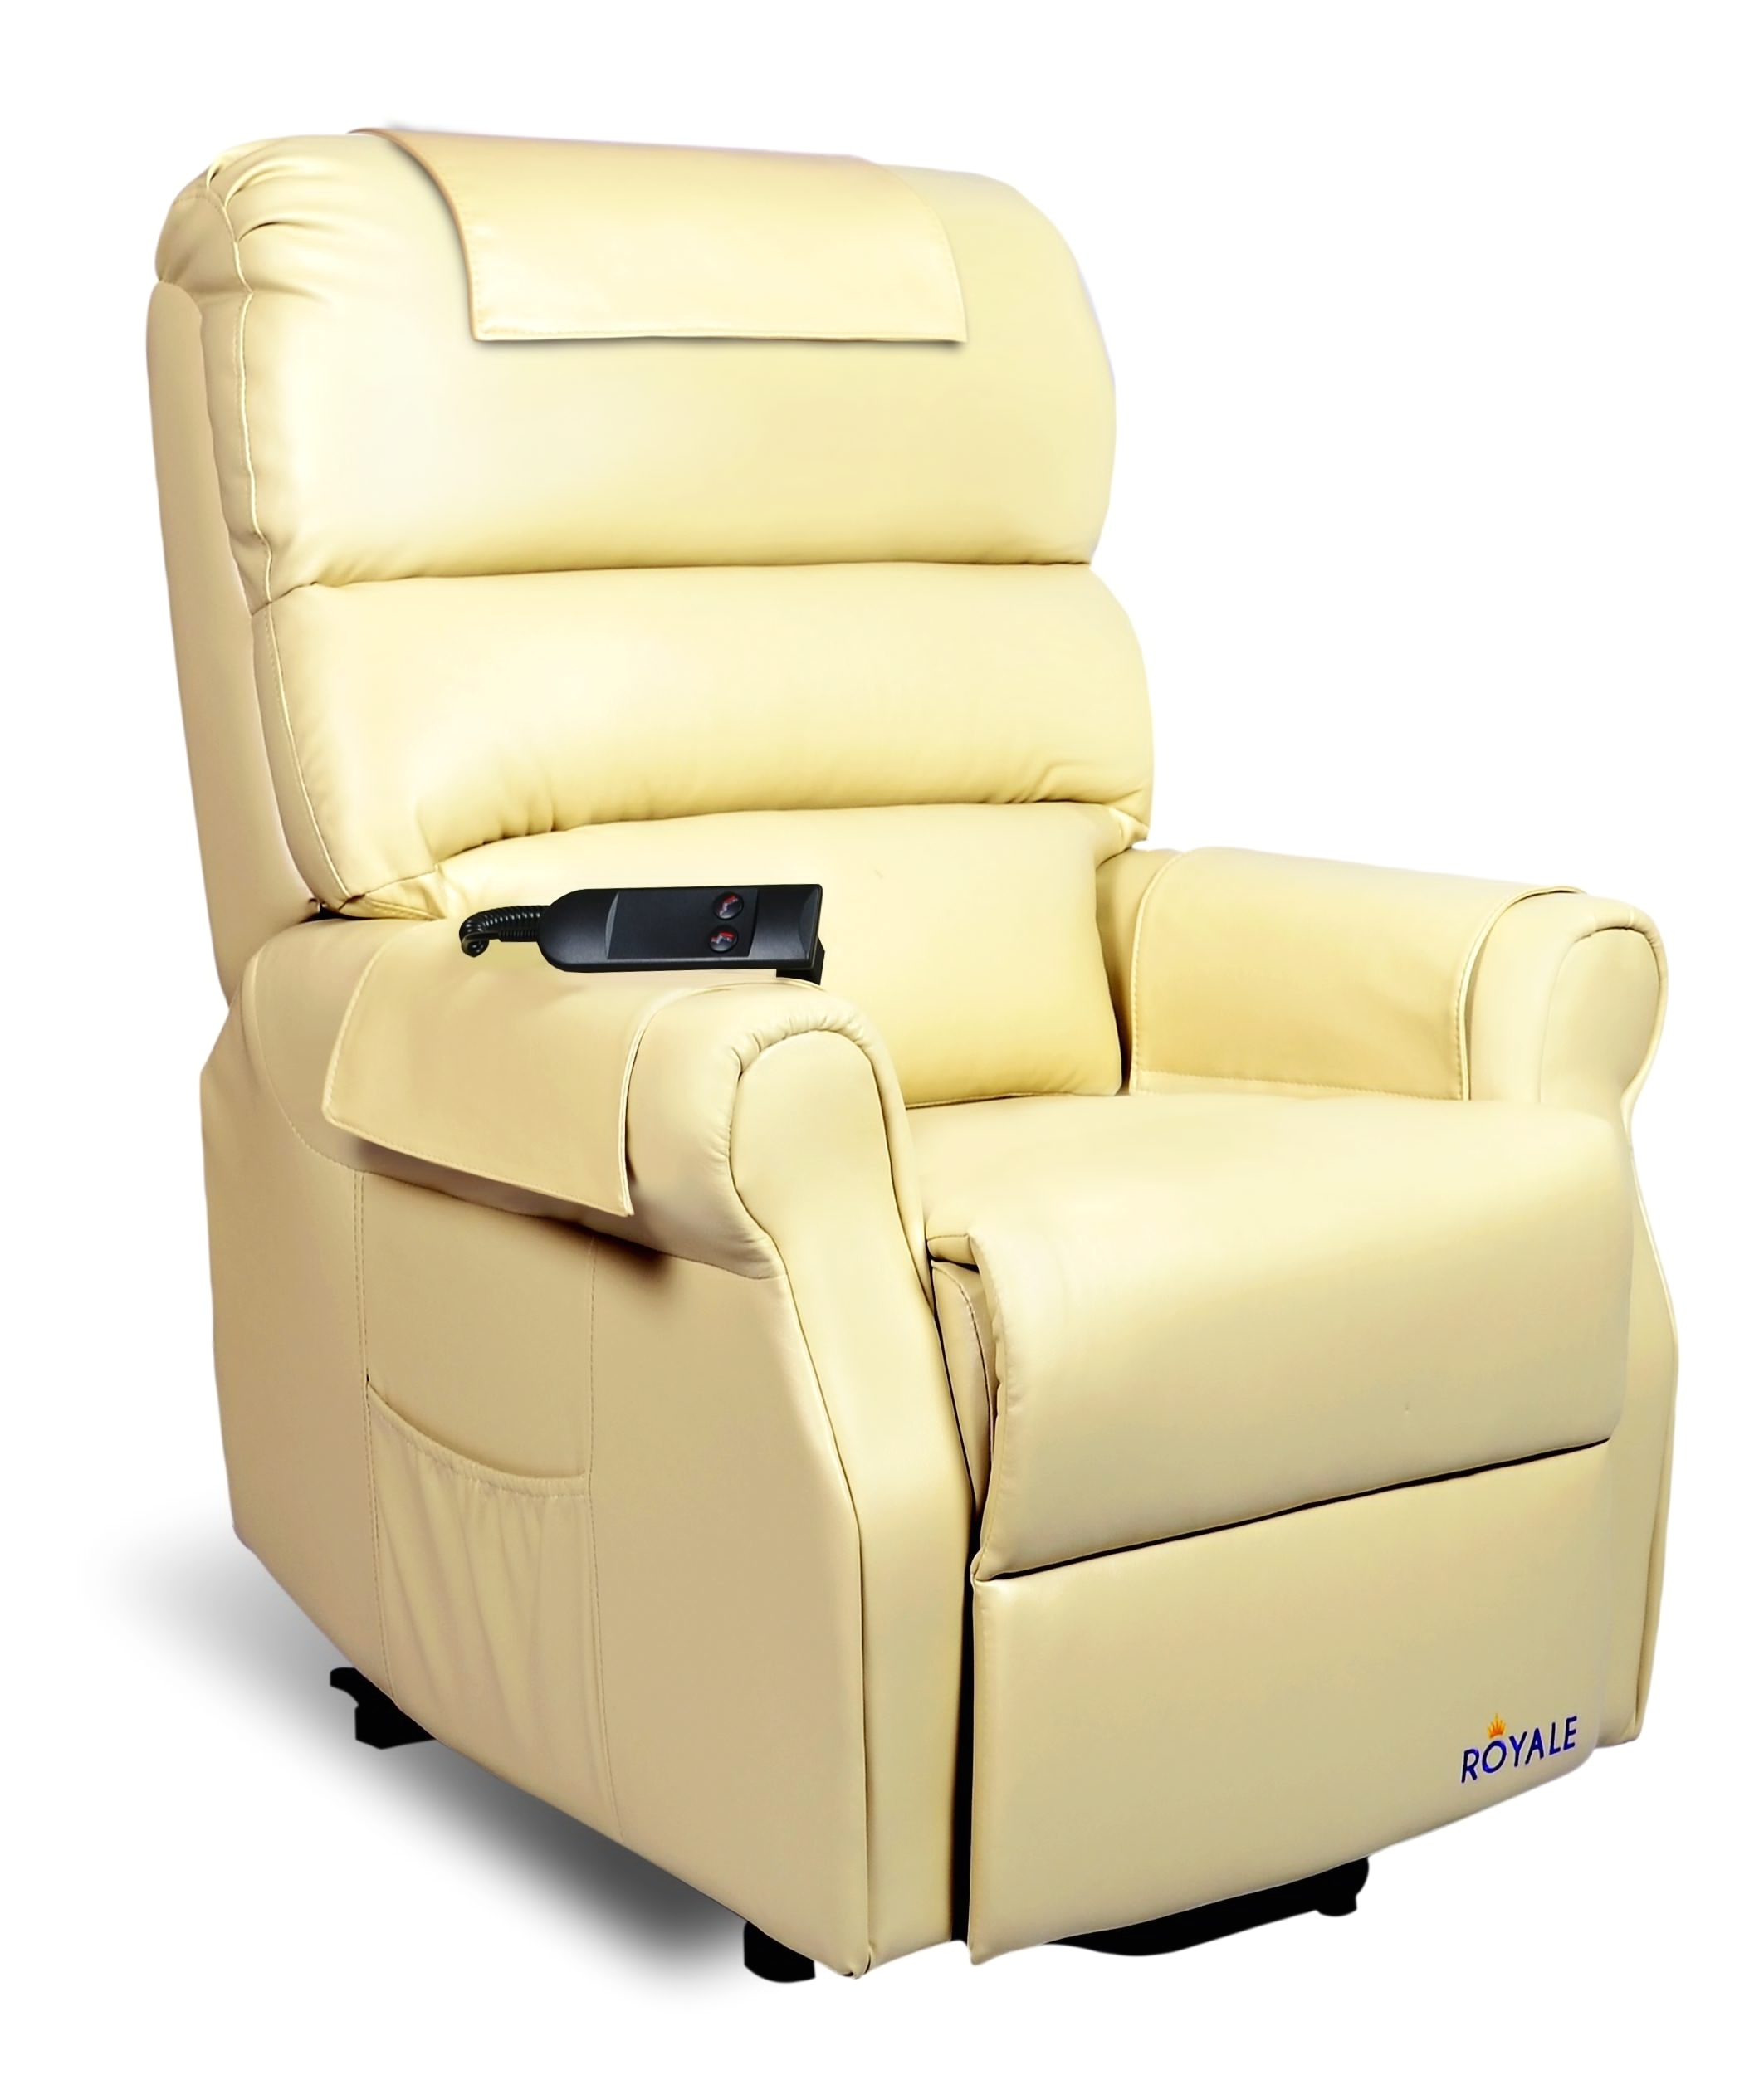 Best Lift Chairs for the Elderly Chair Furniture Lift Chairs Costco Electric Recliner Chair